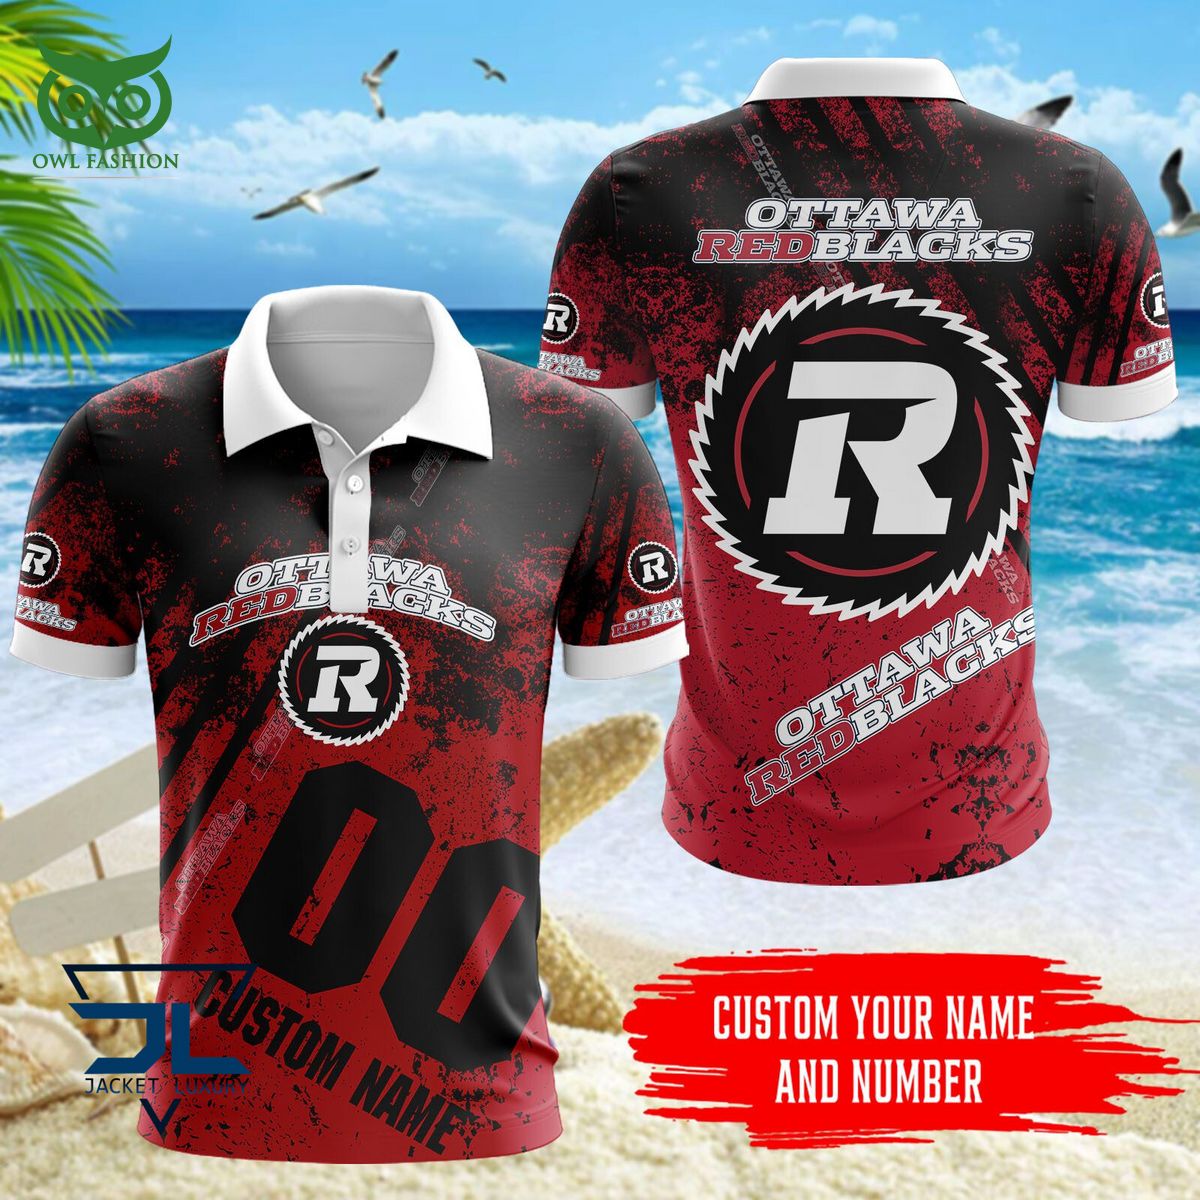 Cricket Jersey Red Black Customized Sublimation Shirt Shirt Only